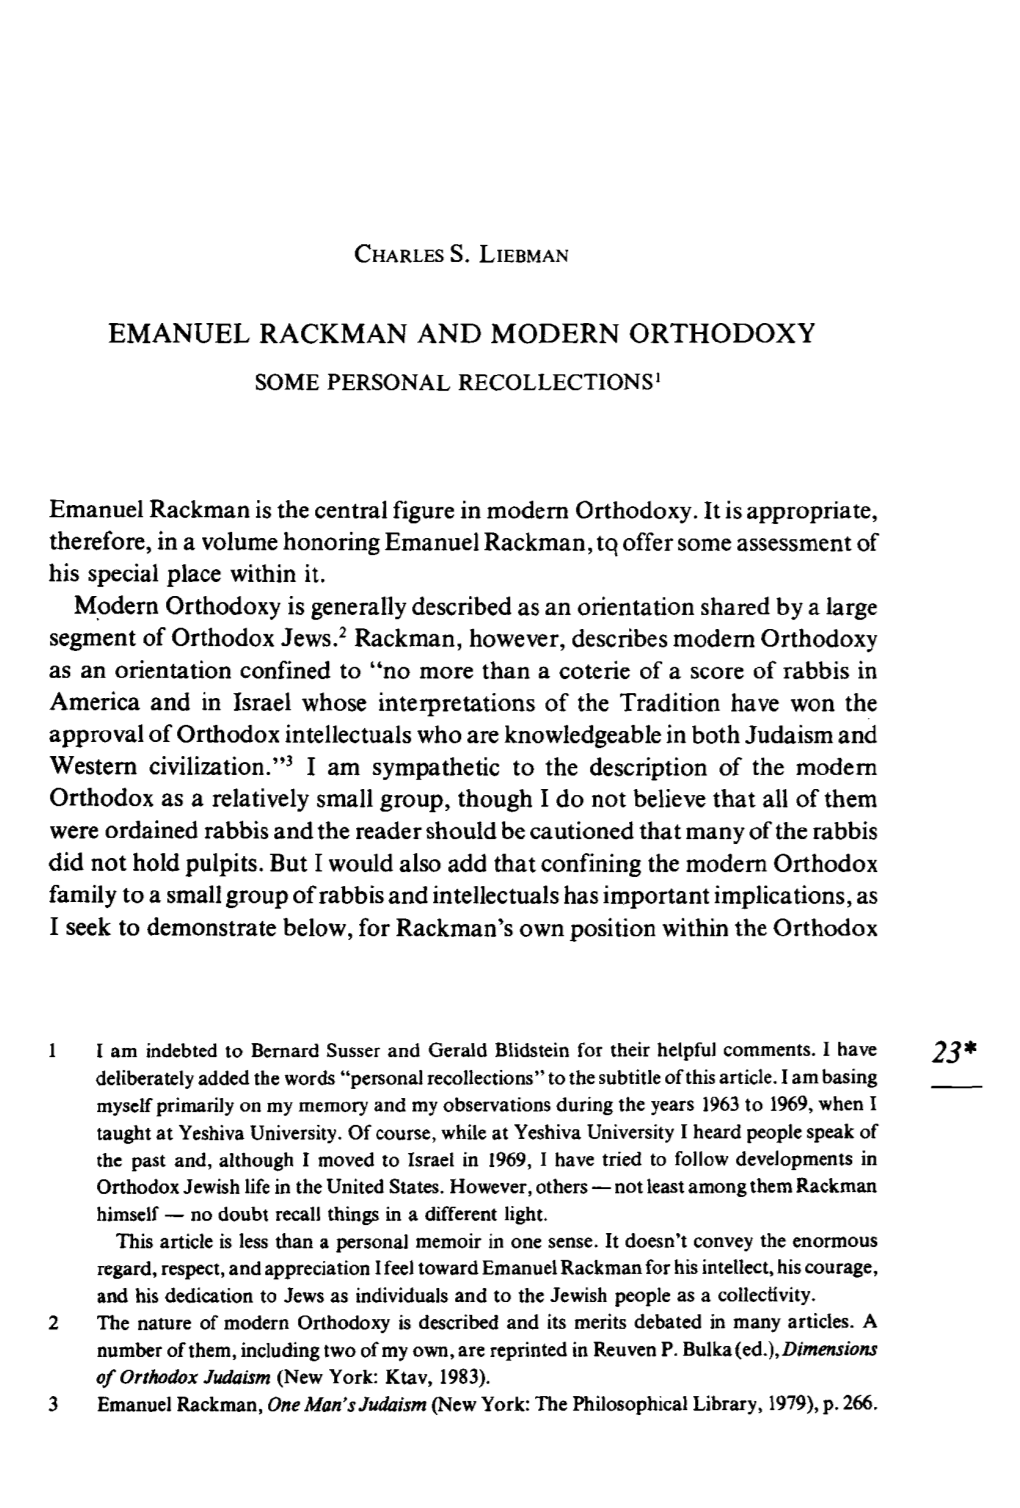 EMANUEL RACKMAN and MODERN ORTHODOXY SOME PERSONAL Recollectionsl